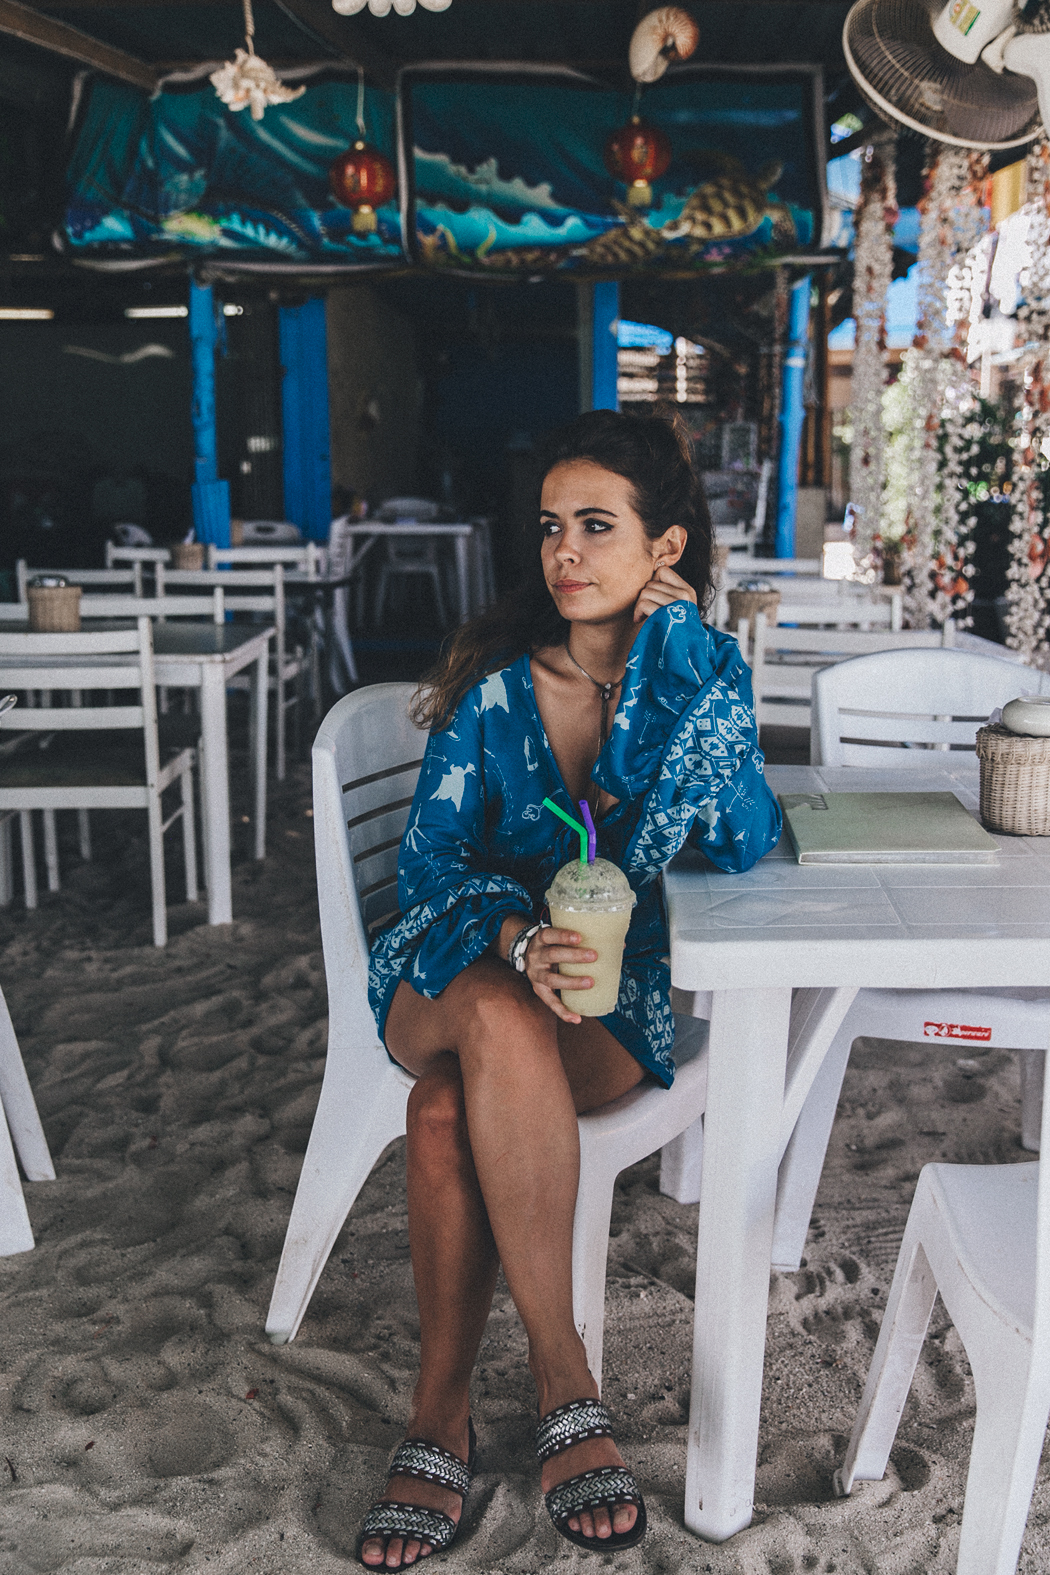 Bohemian_Bones_Dress-Revolve_Clothing-Layering_Necklace-Backpack-Thailand-Phi_Phi_Island-Summer_Look-Outfit-Beach-37